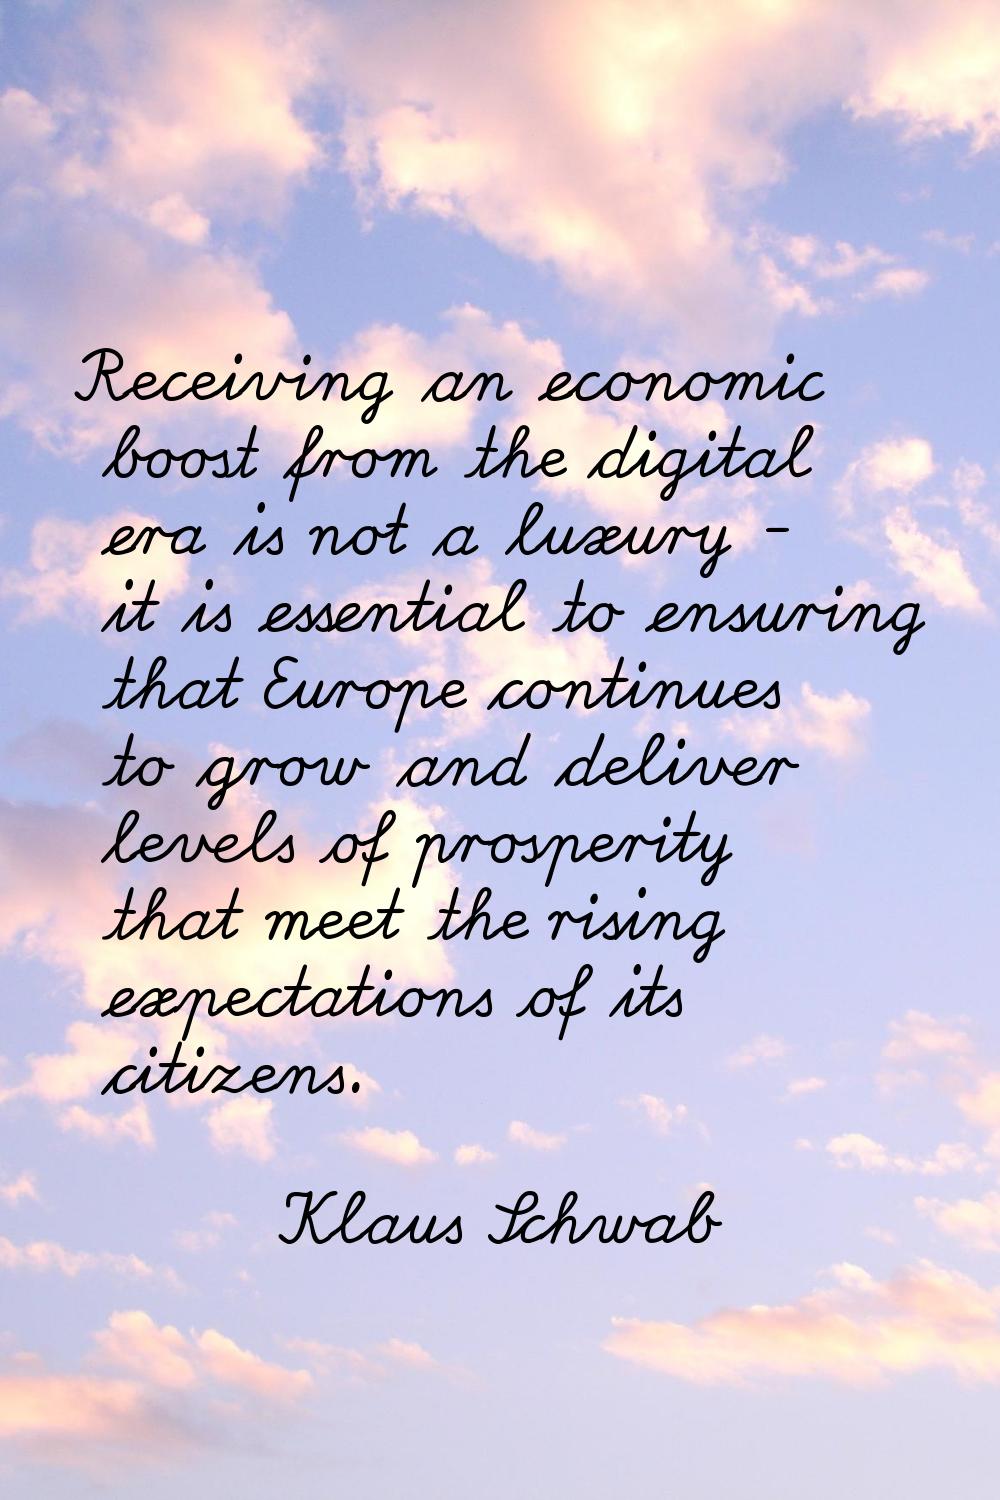 Receiving an economic boost from the digital era is not a luxury - it is essential to ensuring that